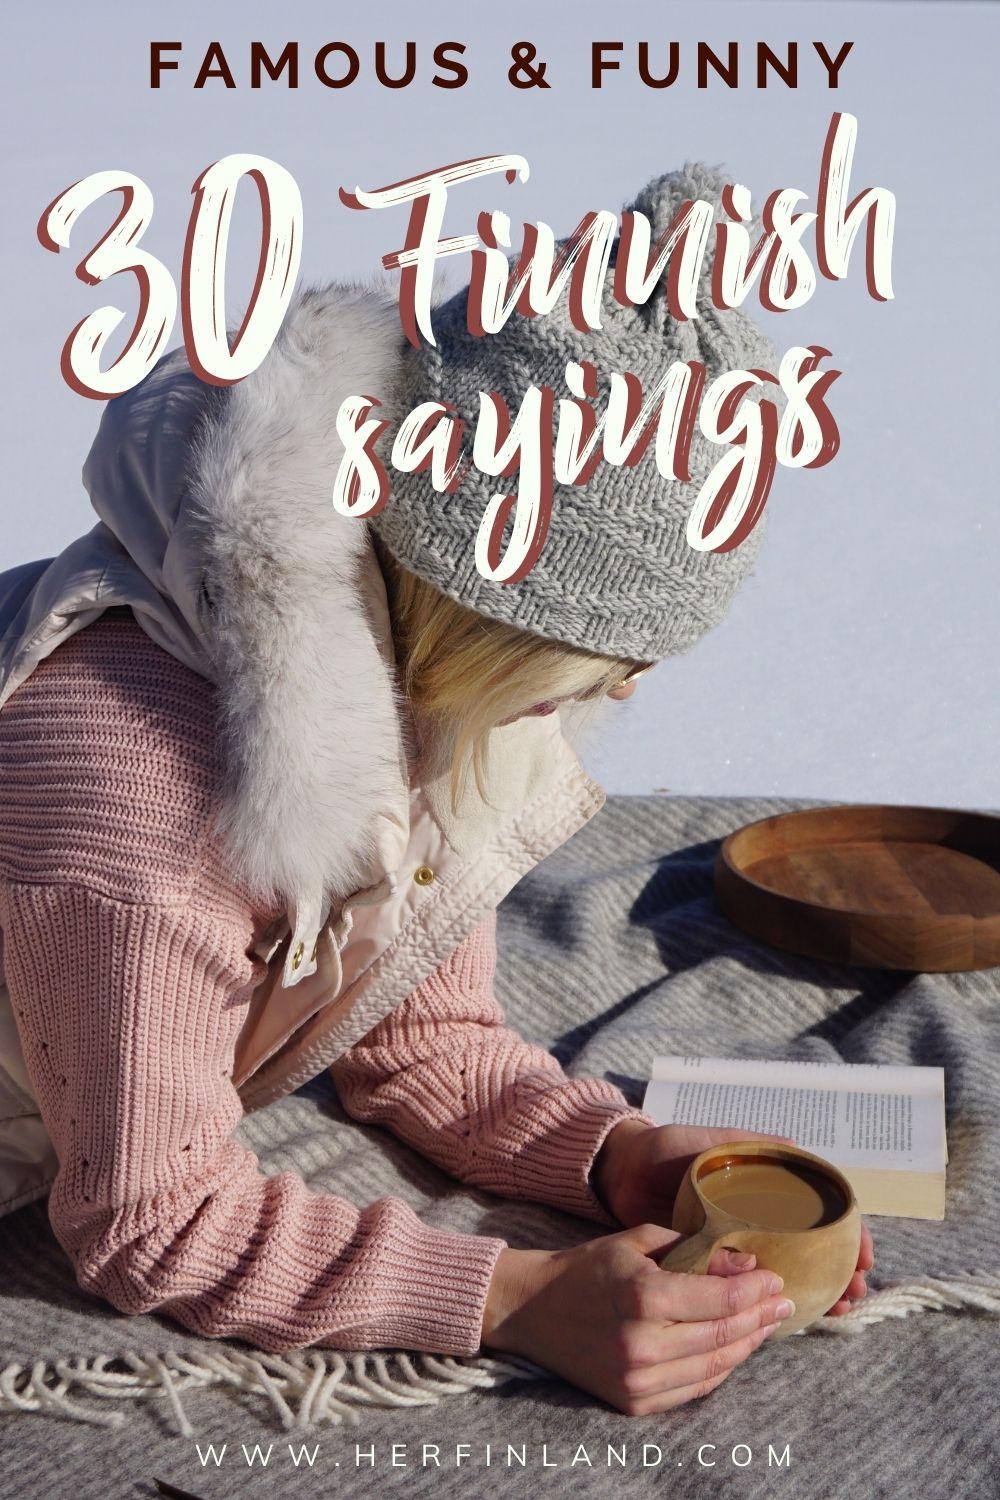 30 Finnish sayings and proverbs that you want in your life